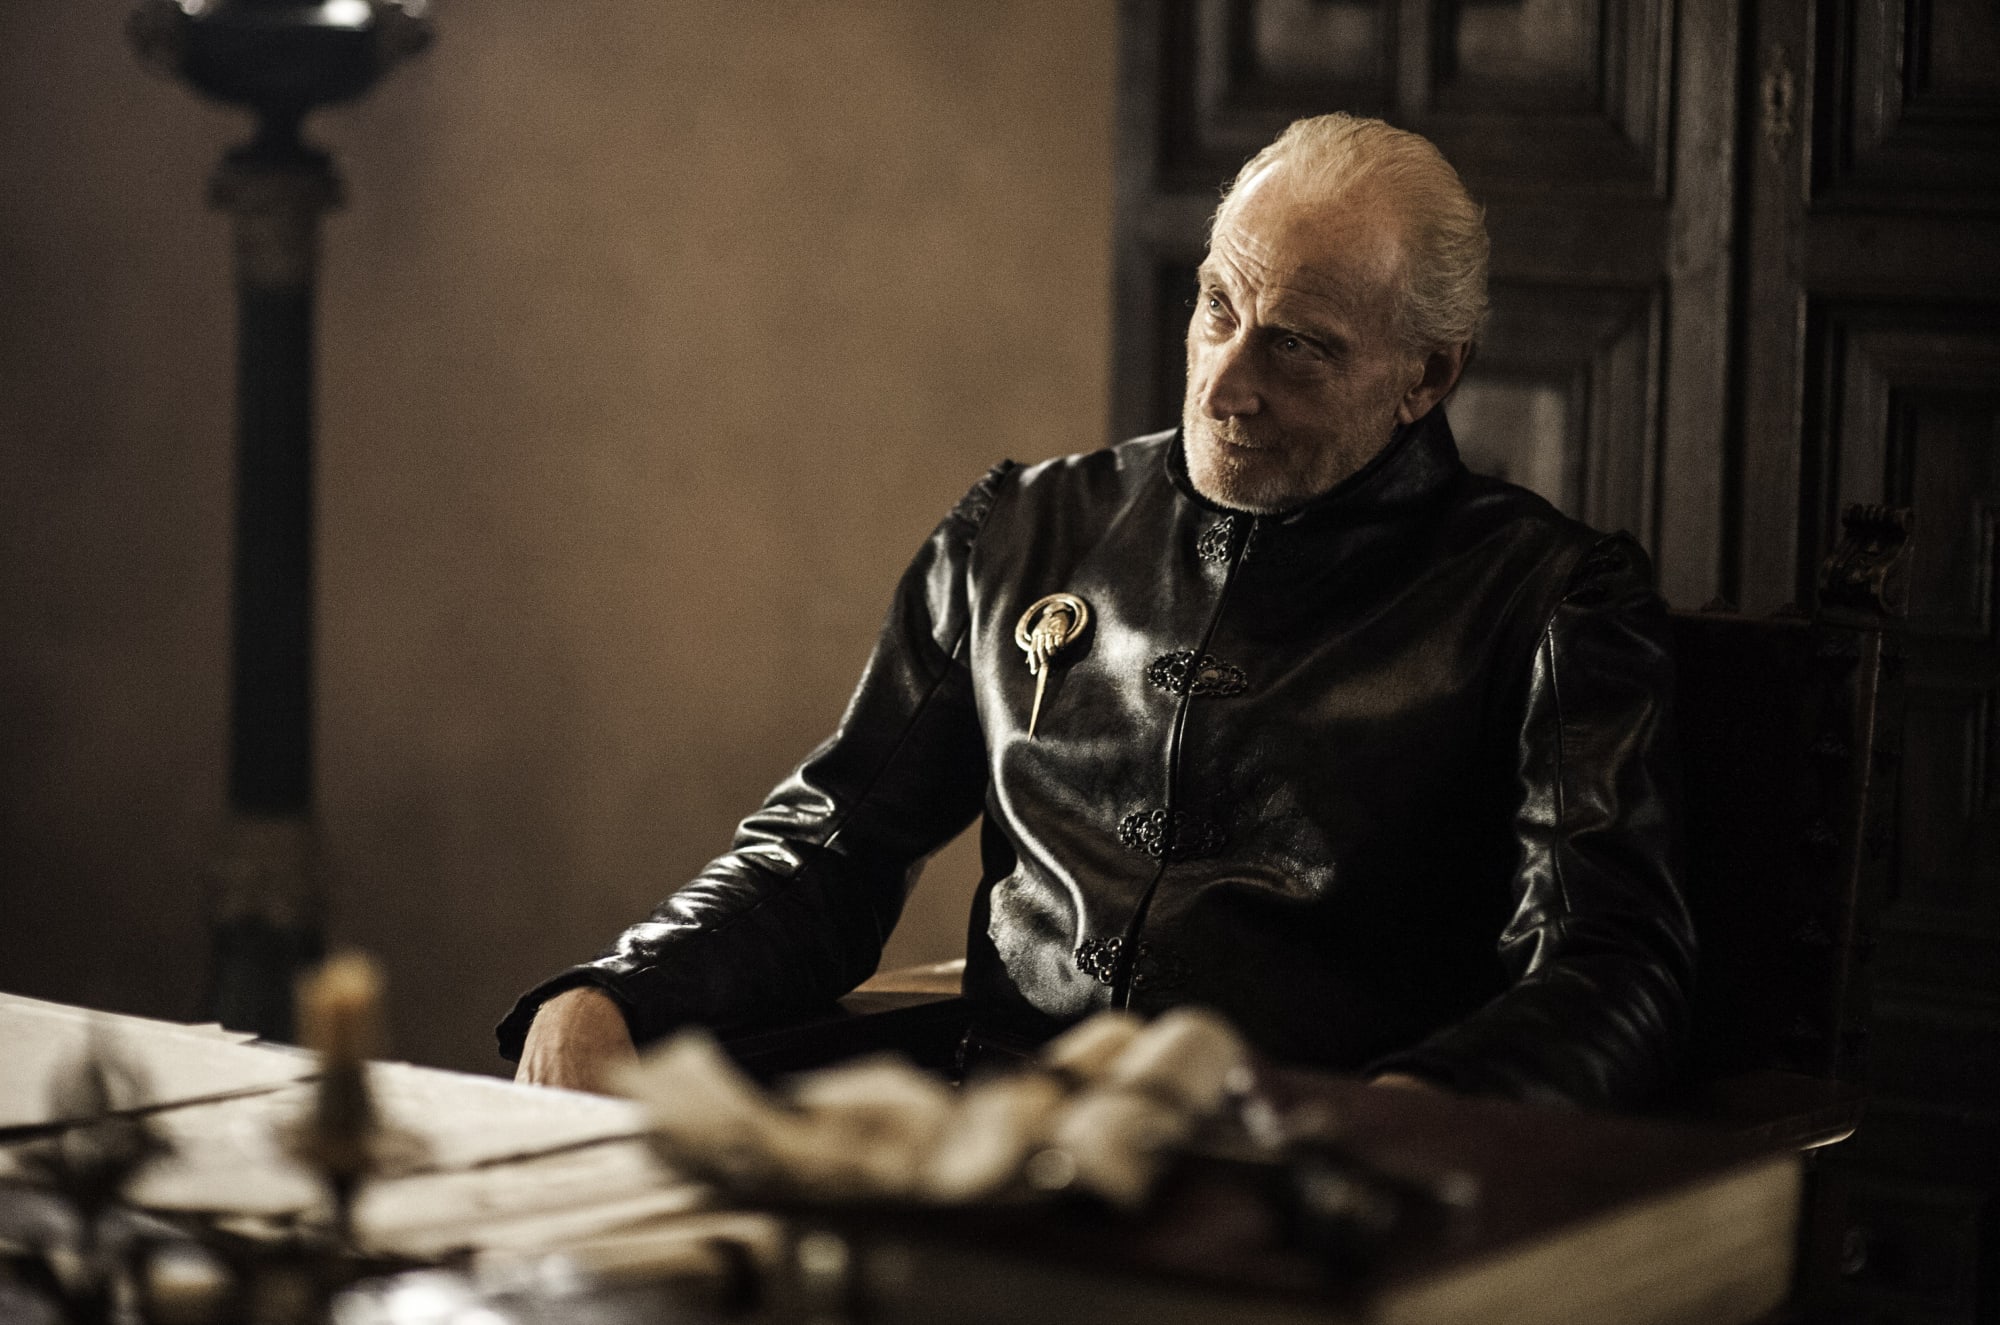 Charles Dance (Tywin Lannister) was “underwhelmed” by Game of Thrones ending